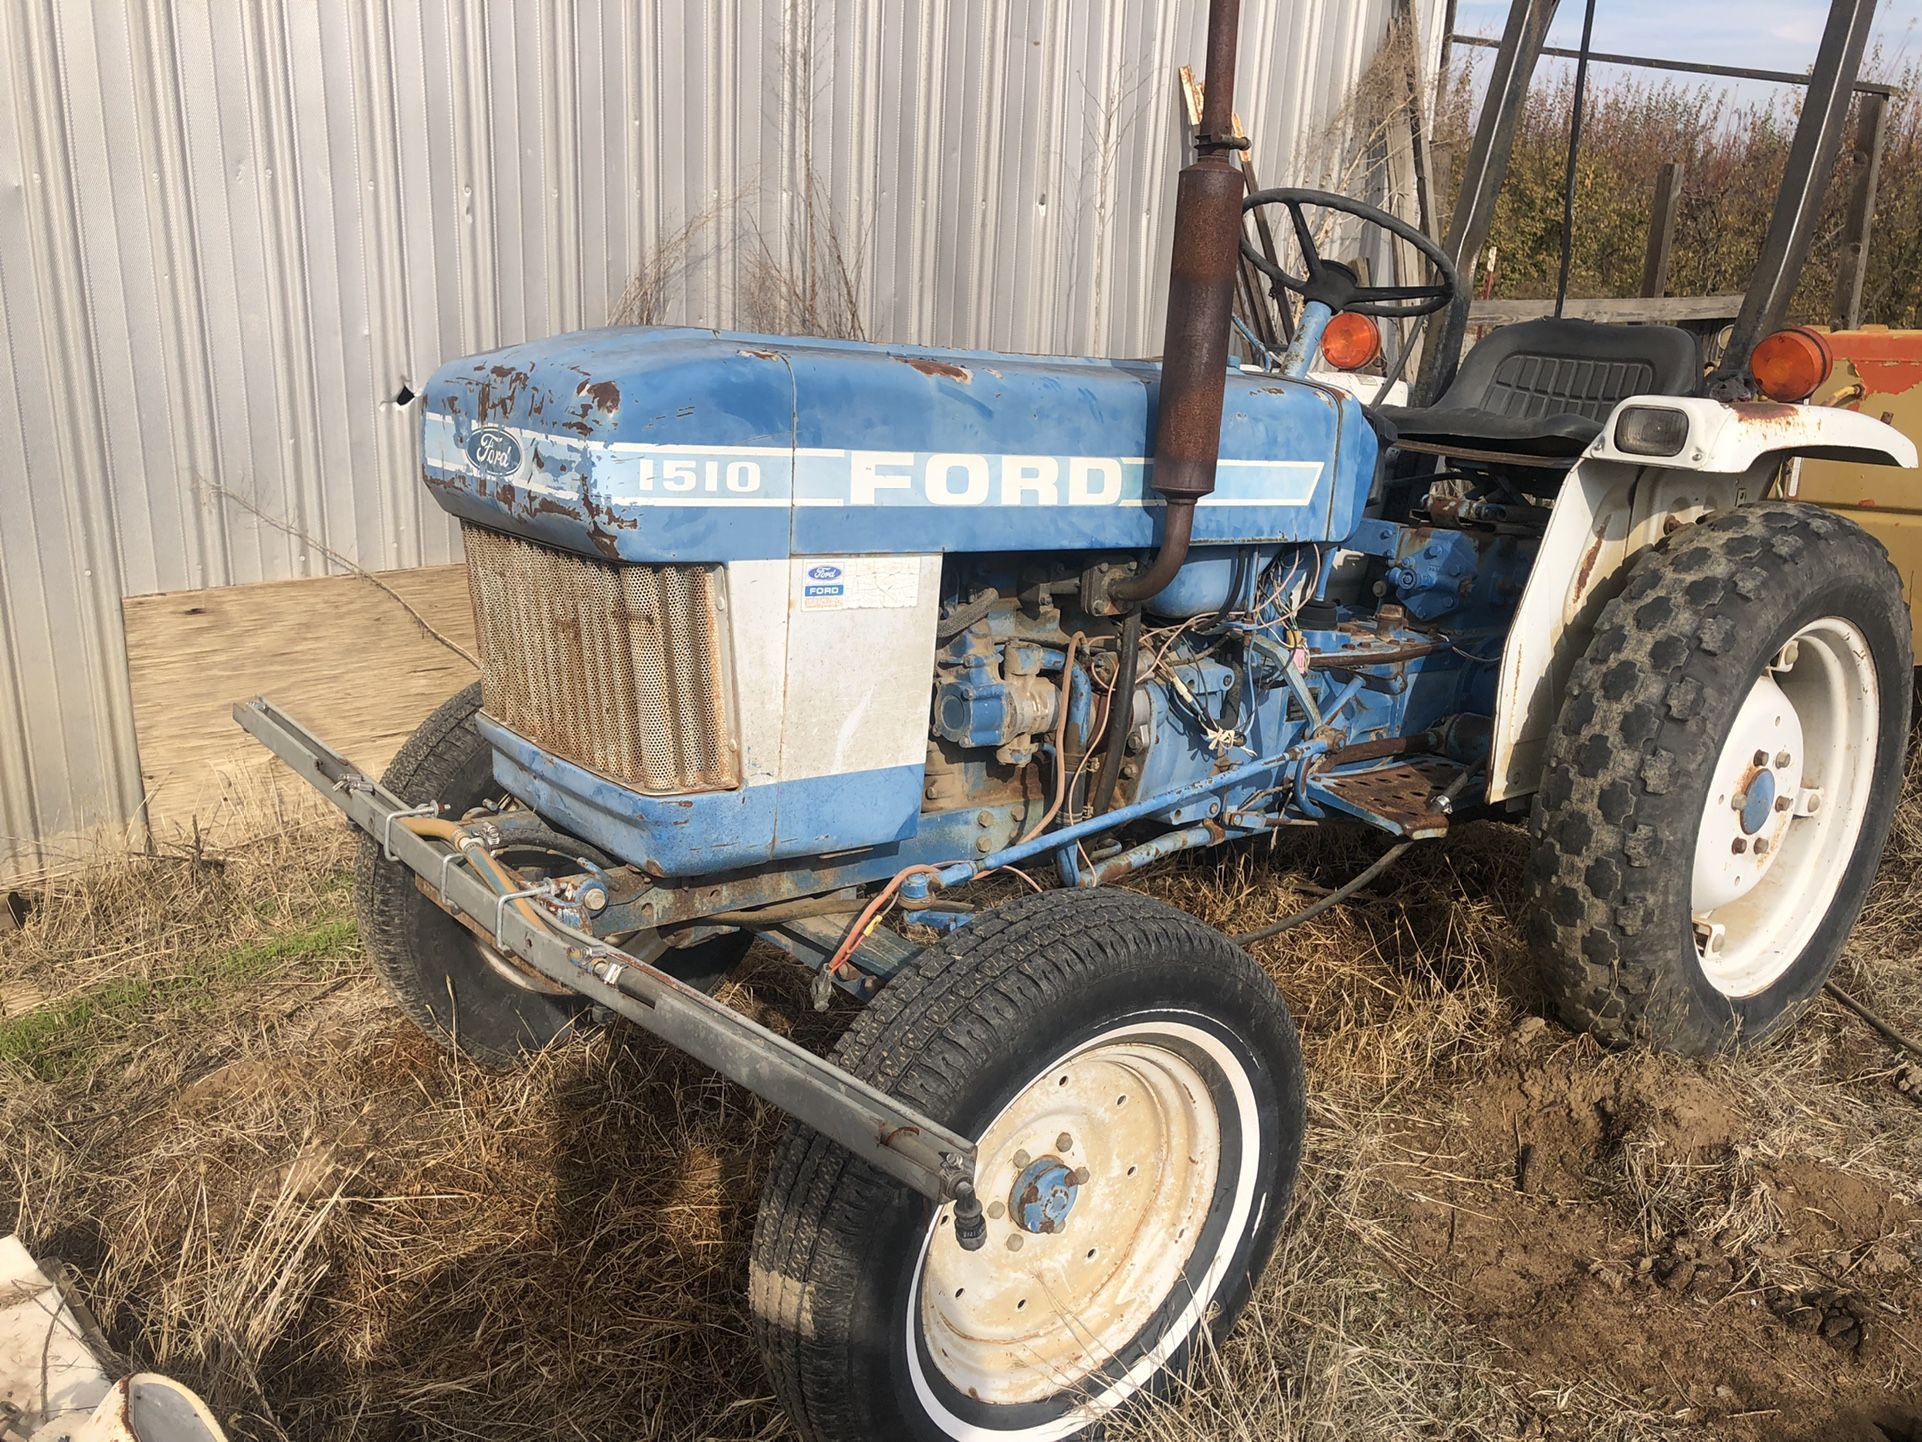  1510 Ford Tractor/ 150gal Spray Tank